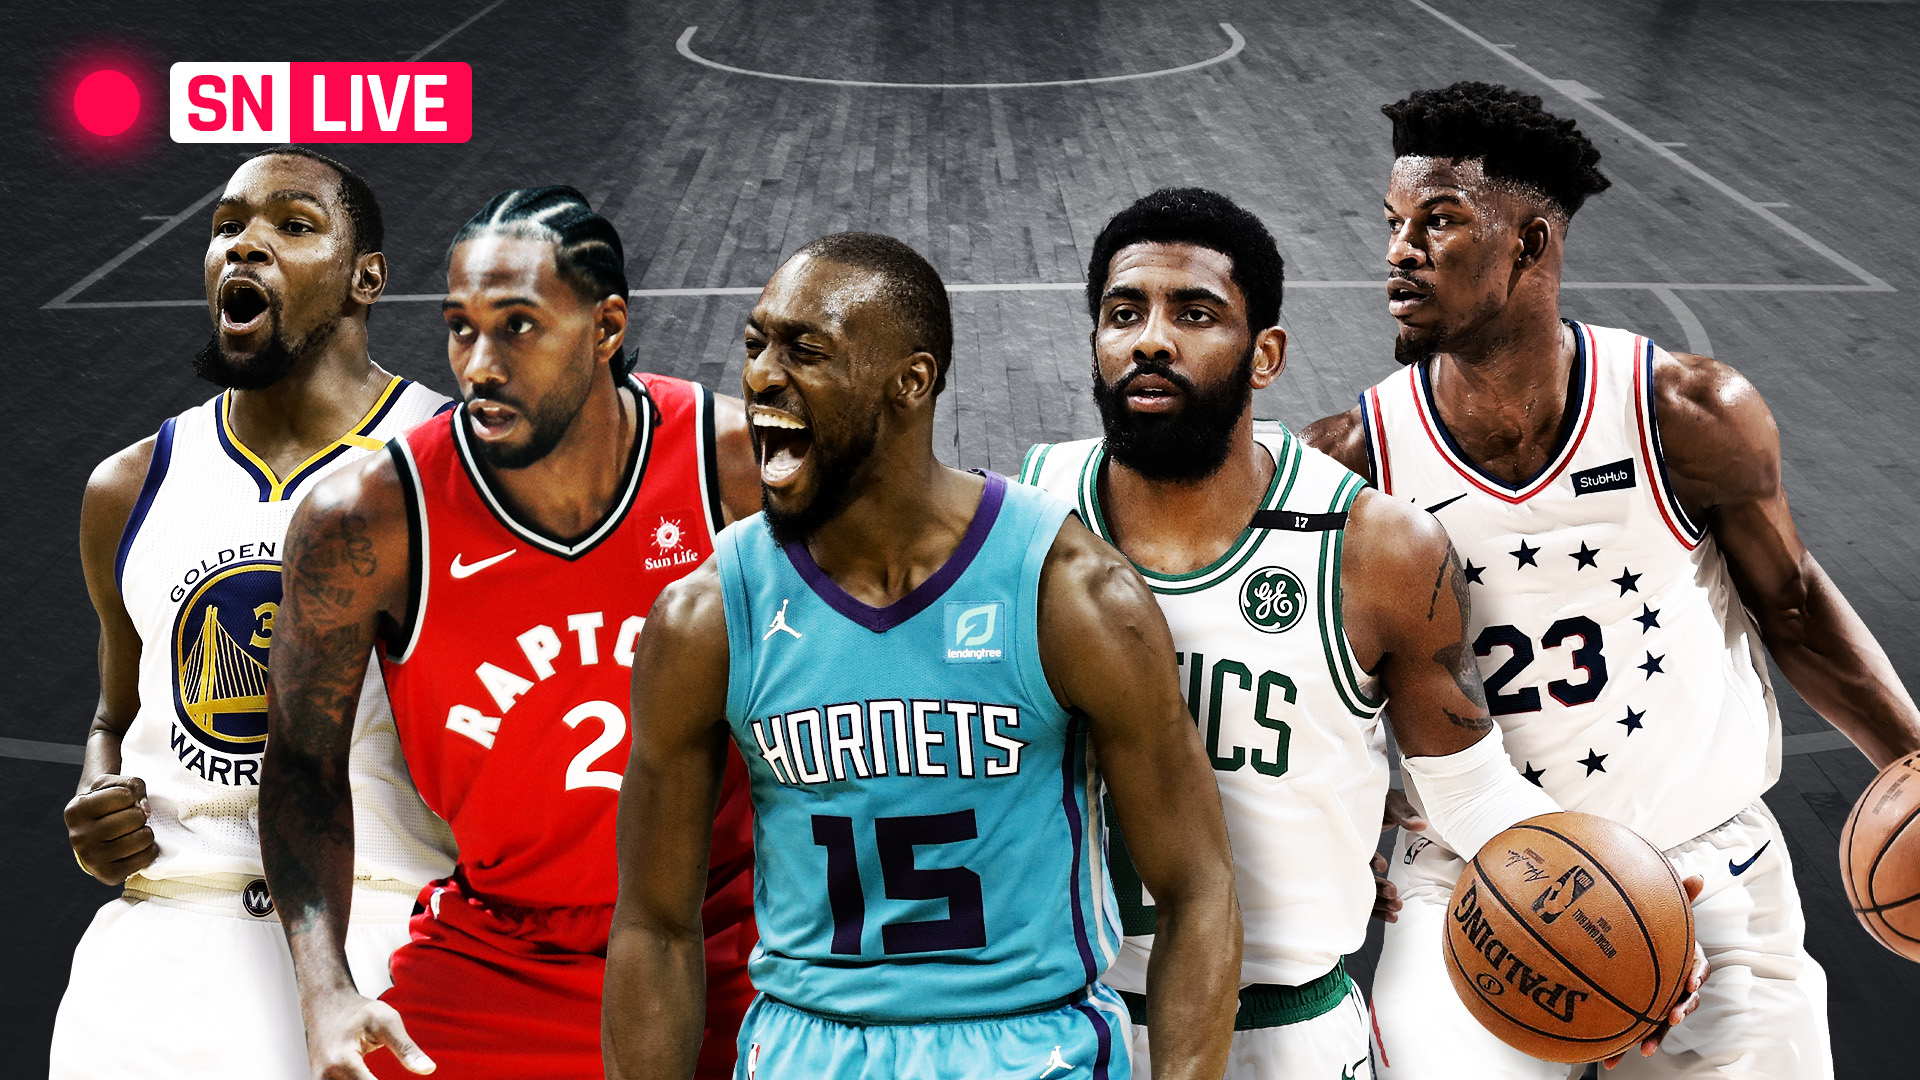 NBA free agency rumors 2019: Live updates, news on signings, trades and